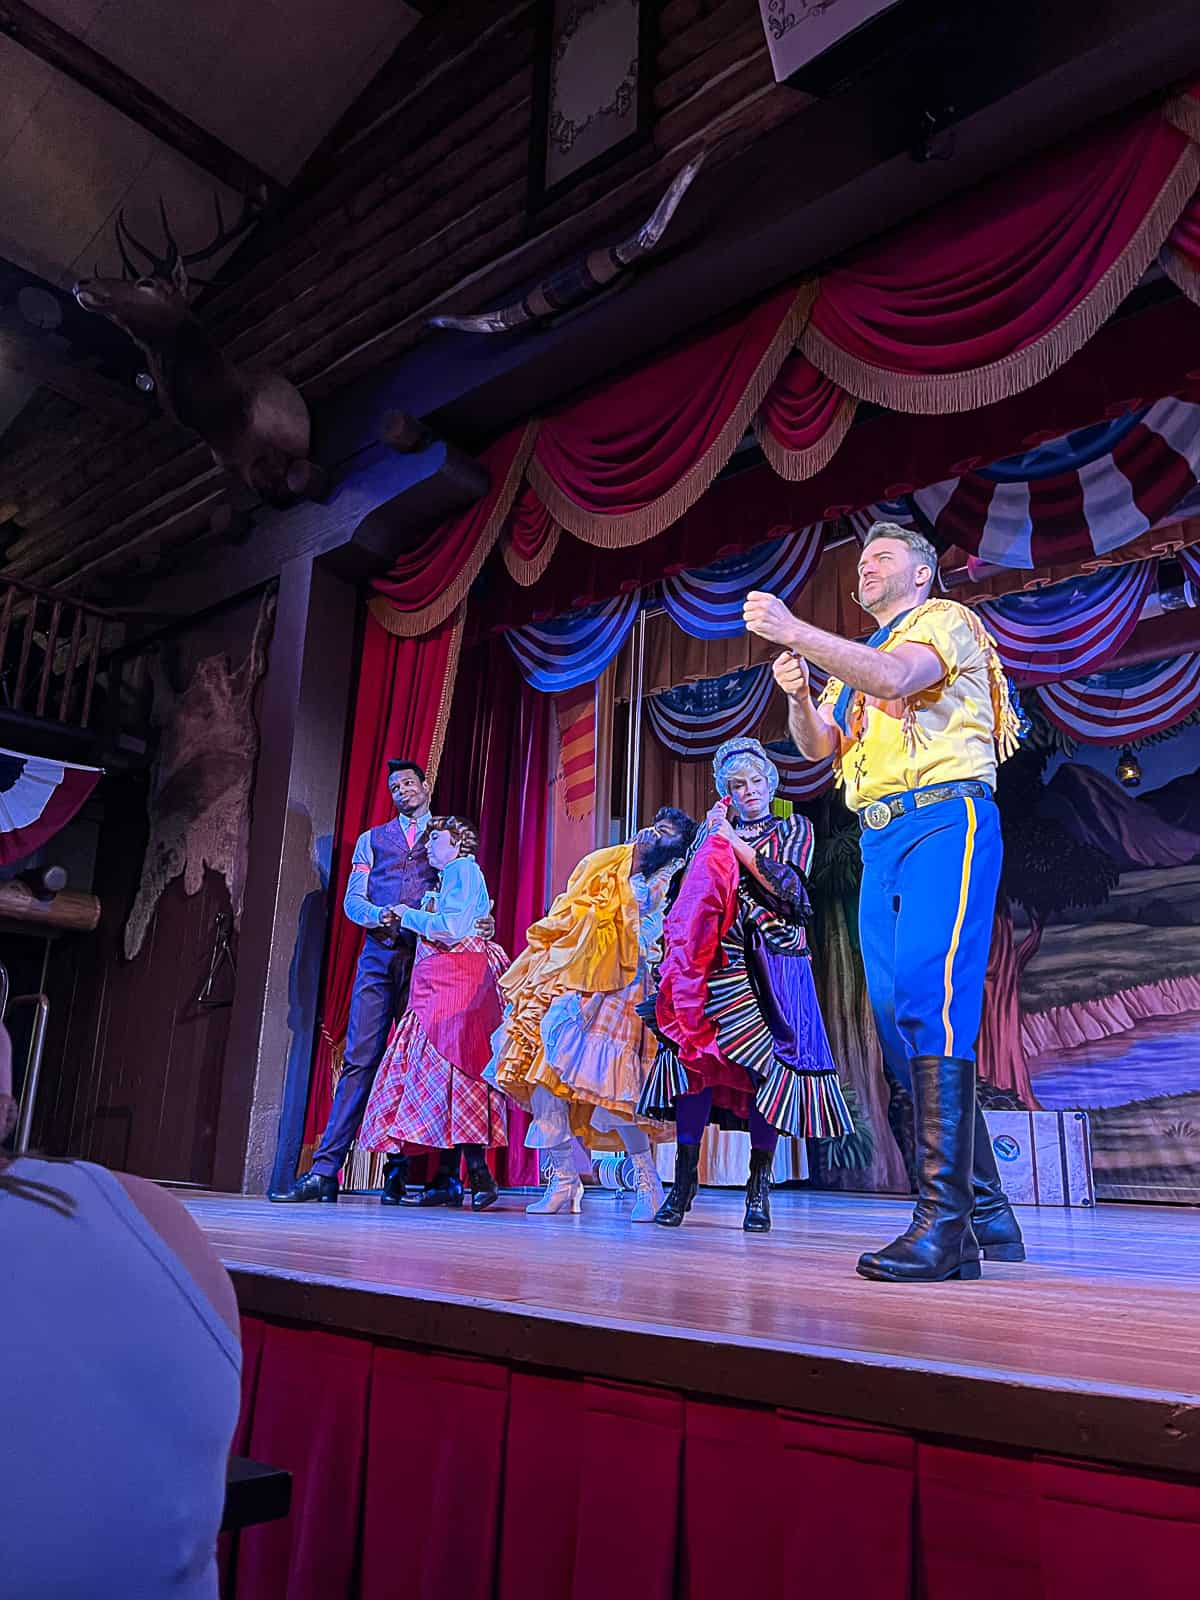 Hoop Dee Doo Musical Review Activity To Do at Walt Disney World without a park ticket